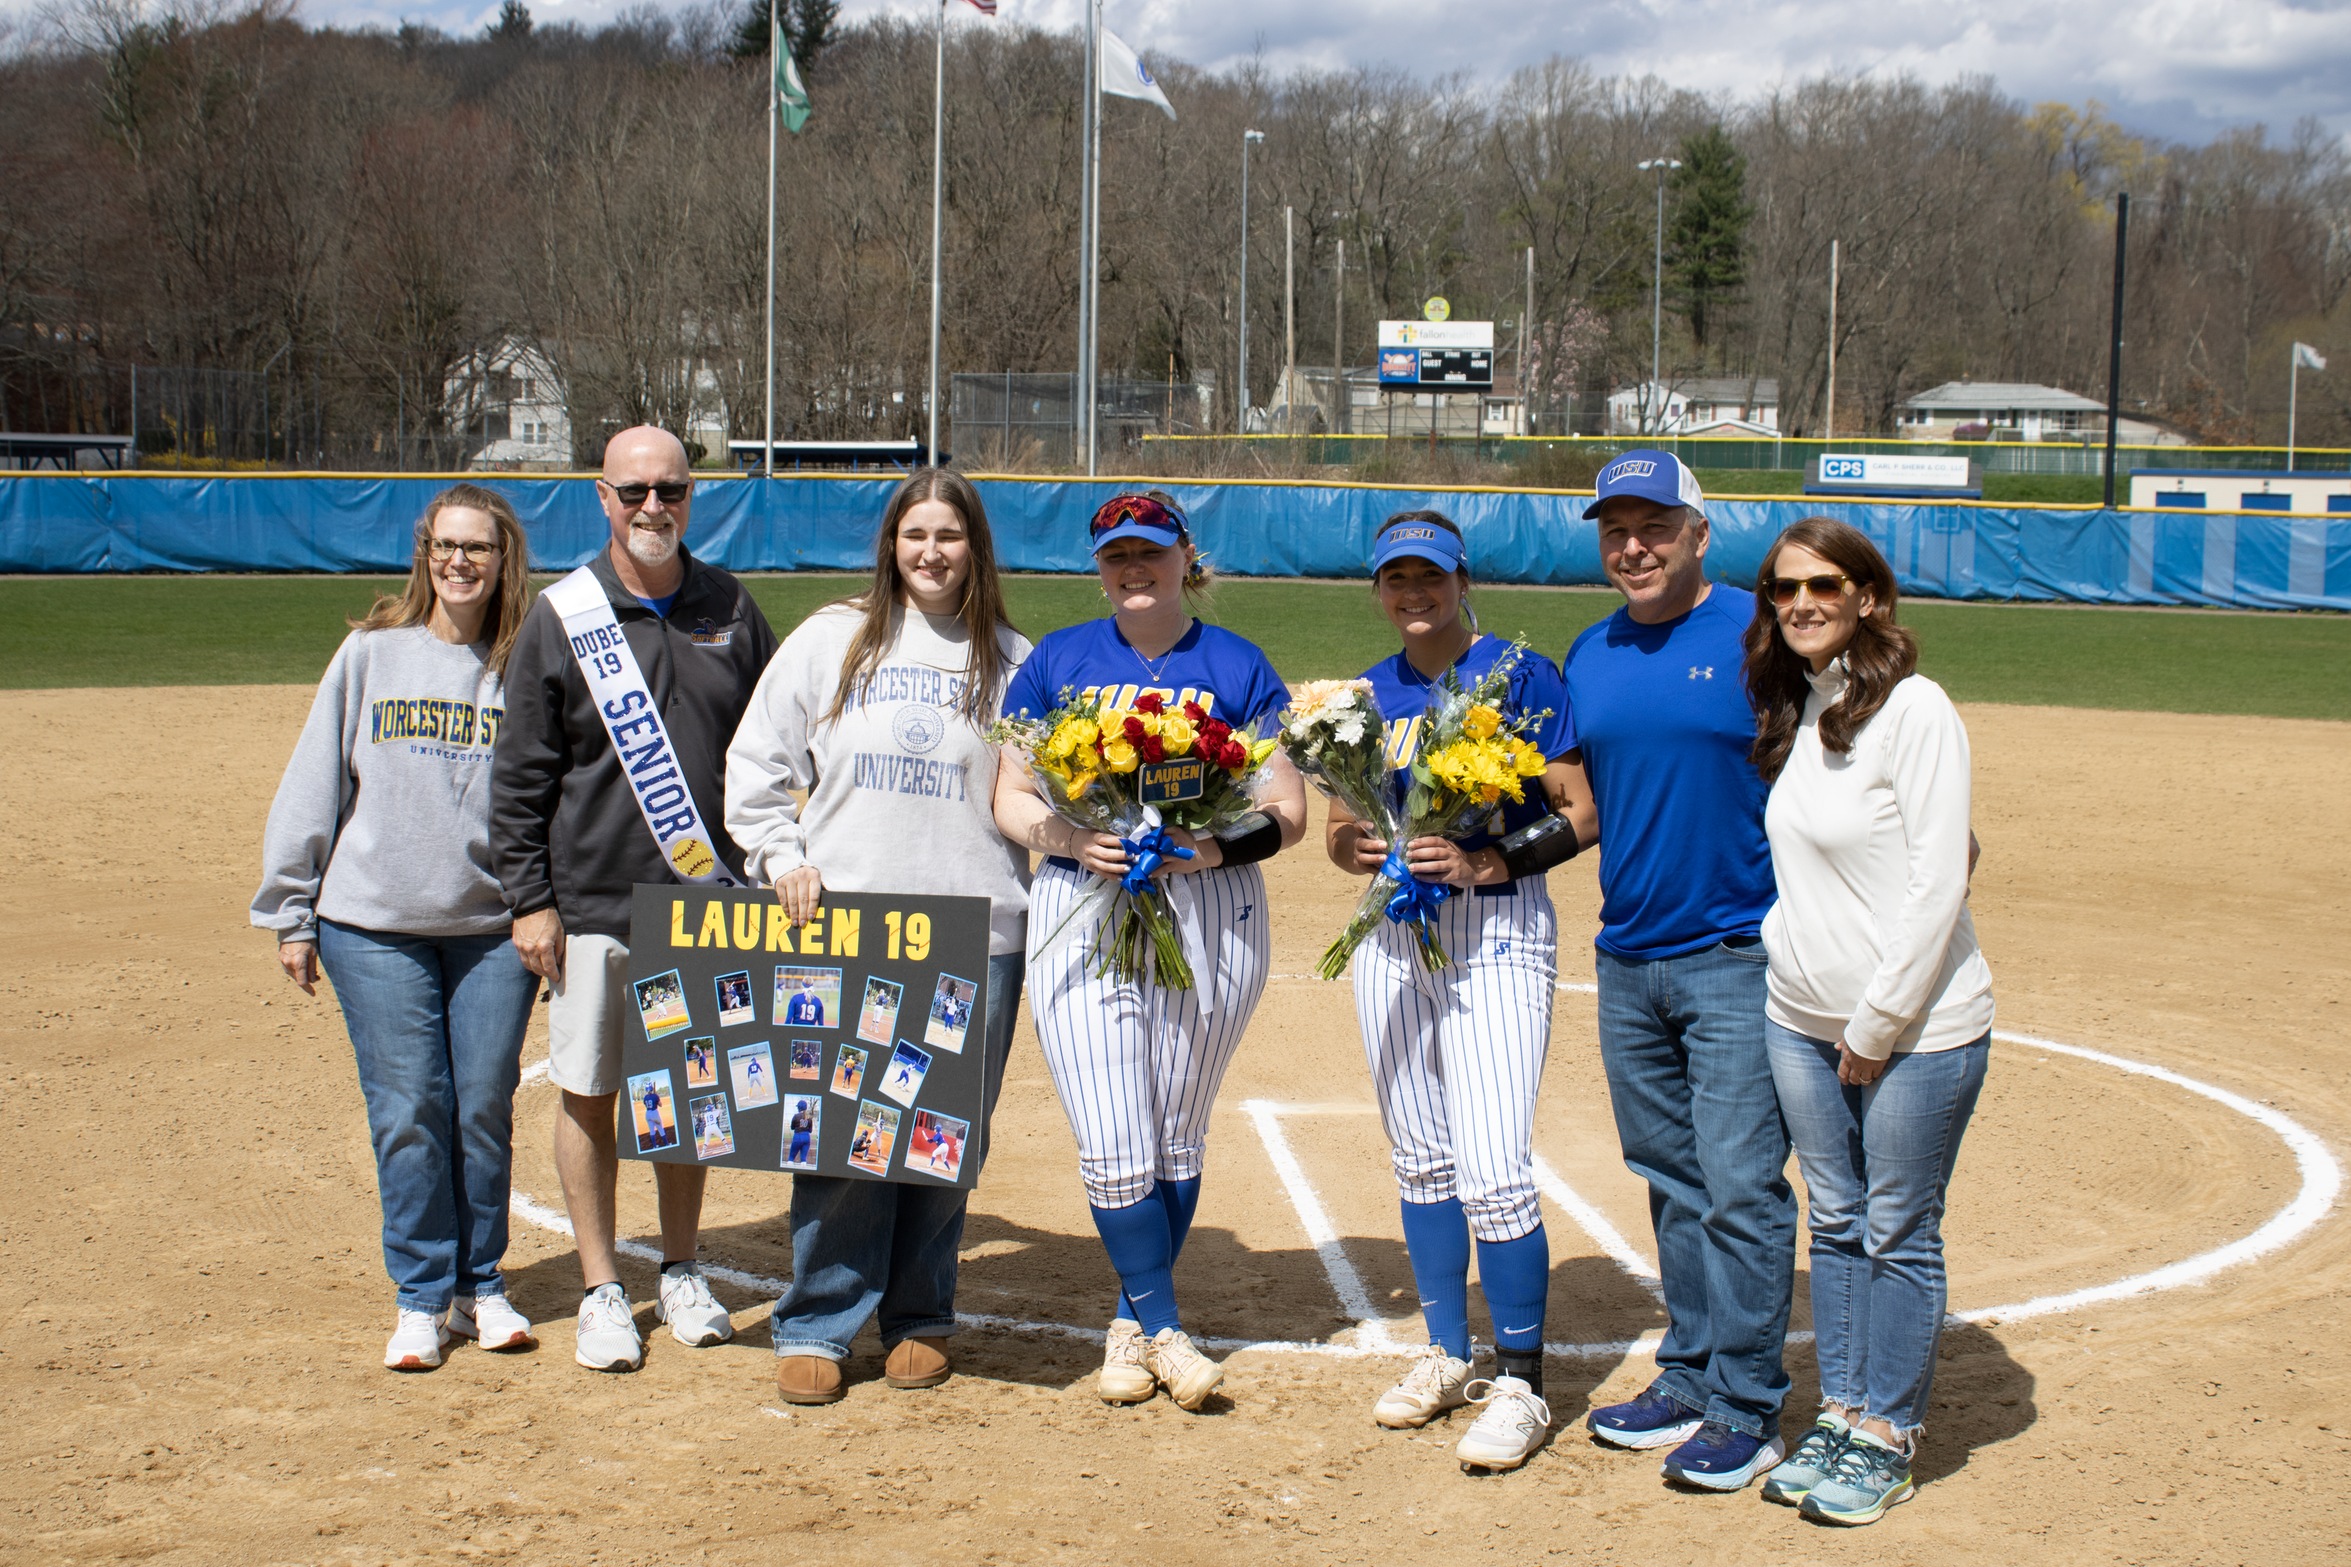 Lancers Hold Strong in Sweep of Falcons on Senior Day